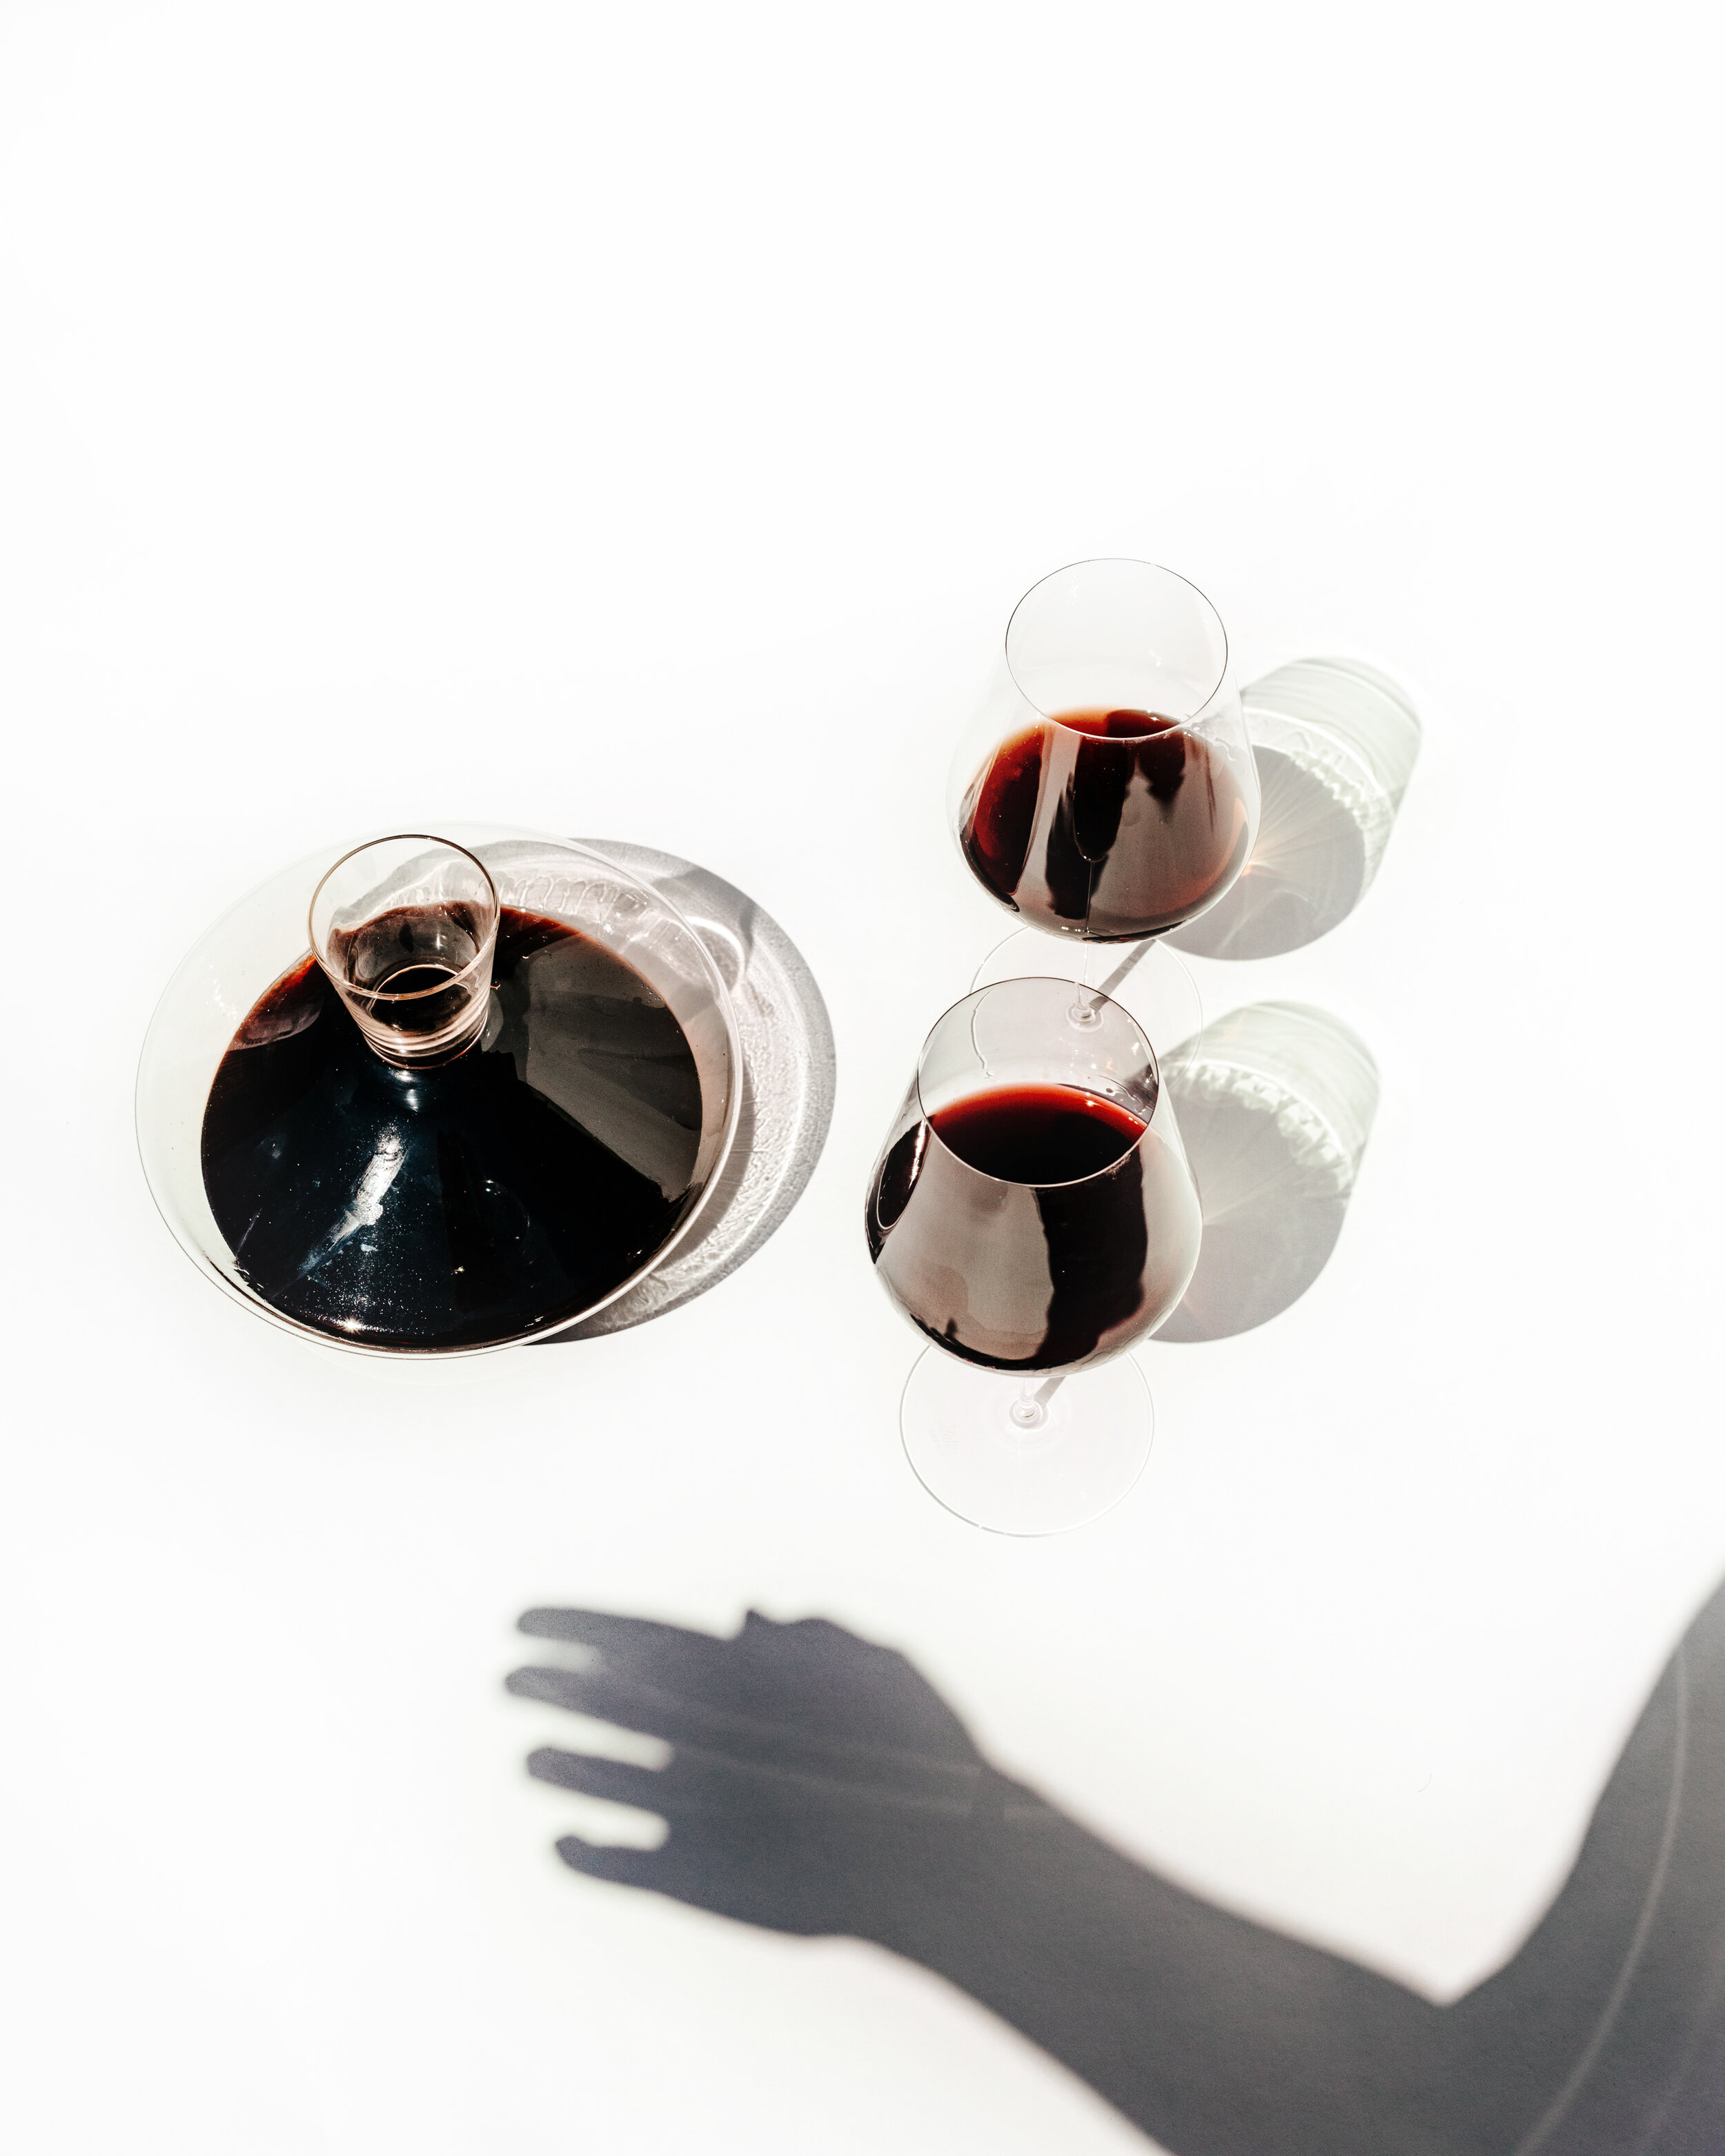 silhouette of a woman's hand with wine decanter